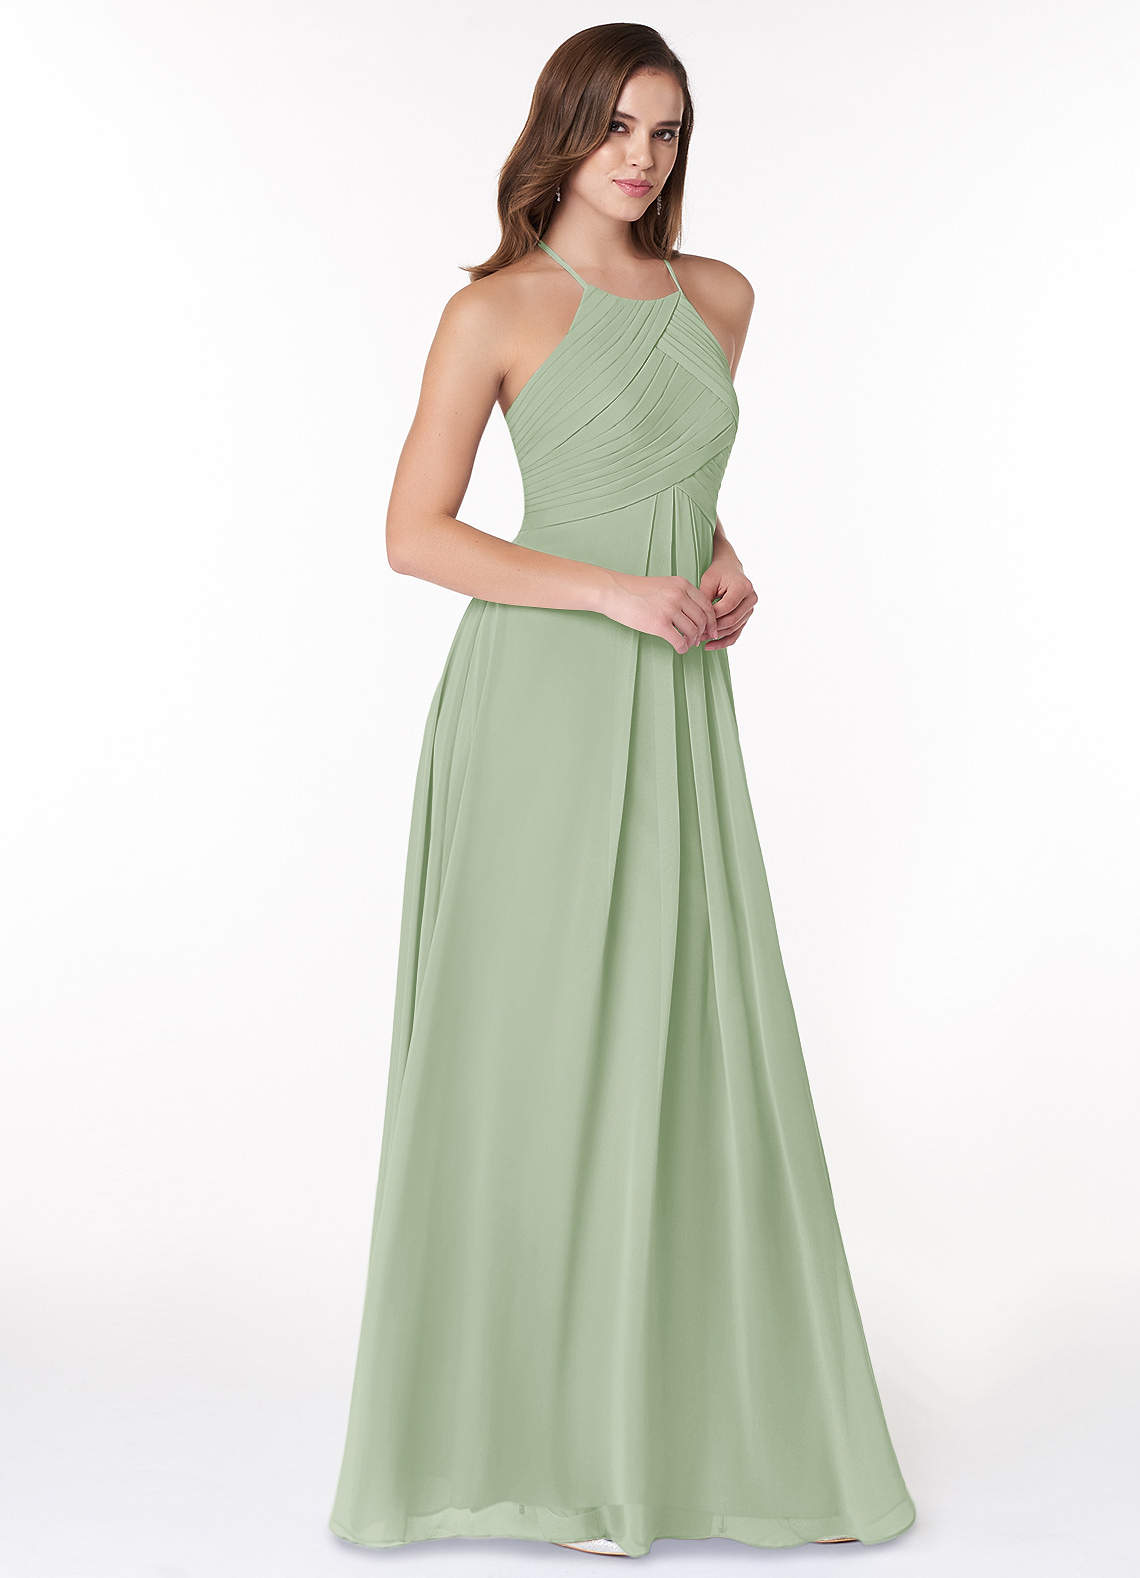 Dusty Sage Ginger Try-on Dress Sample Dress Bridesmaid Dresses | Azazie